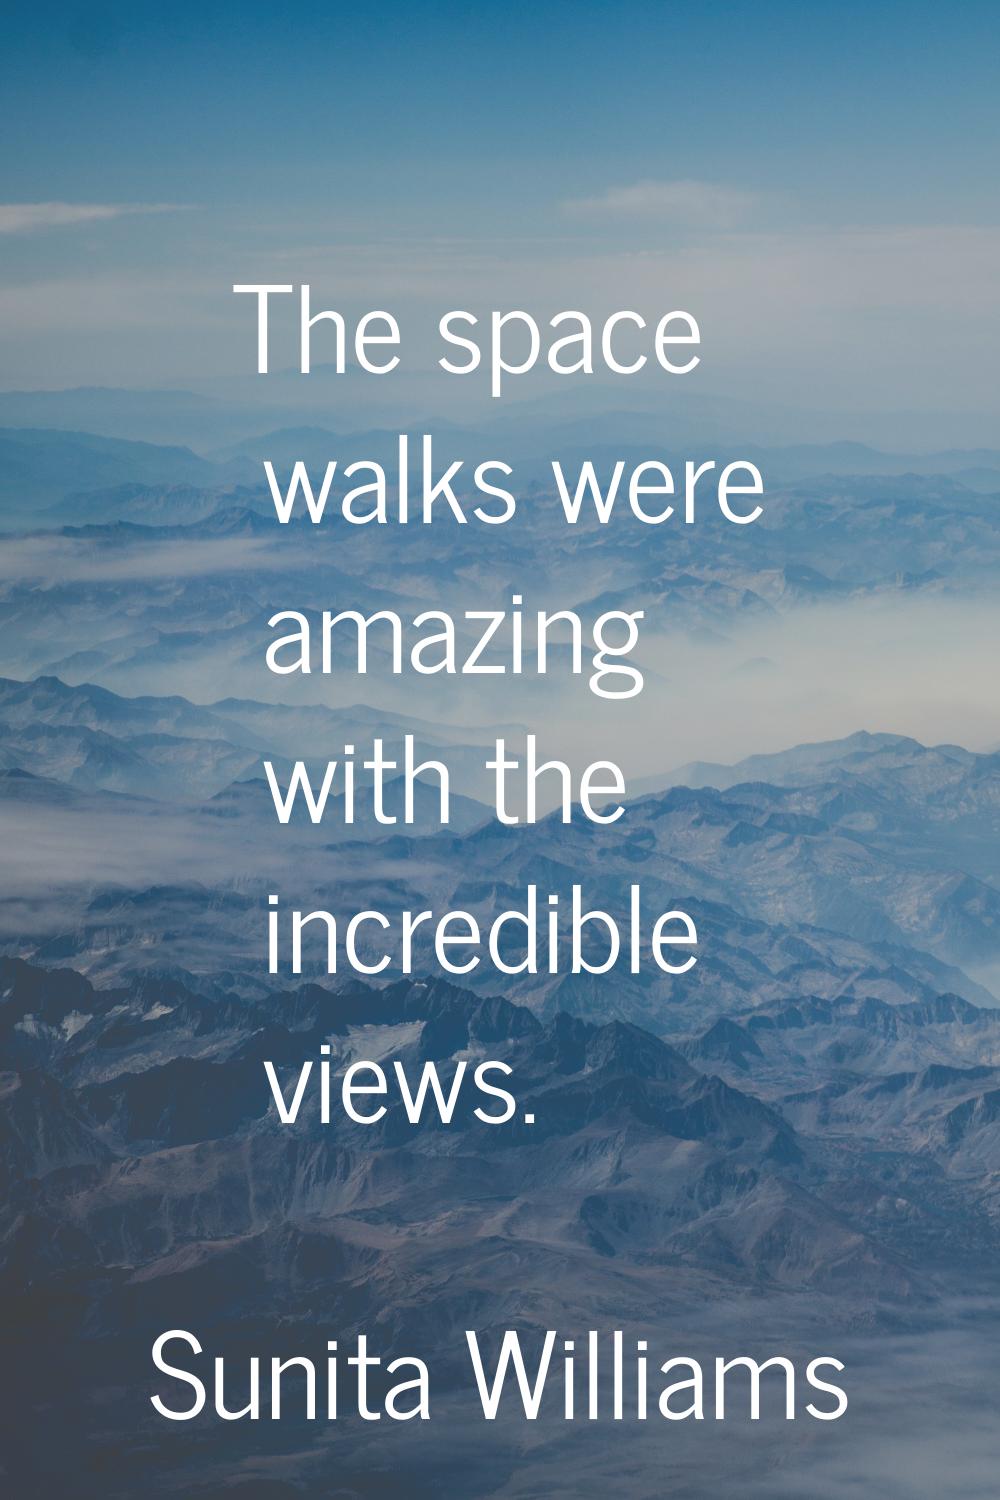 The space walks were amazing with the incredible views.